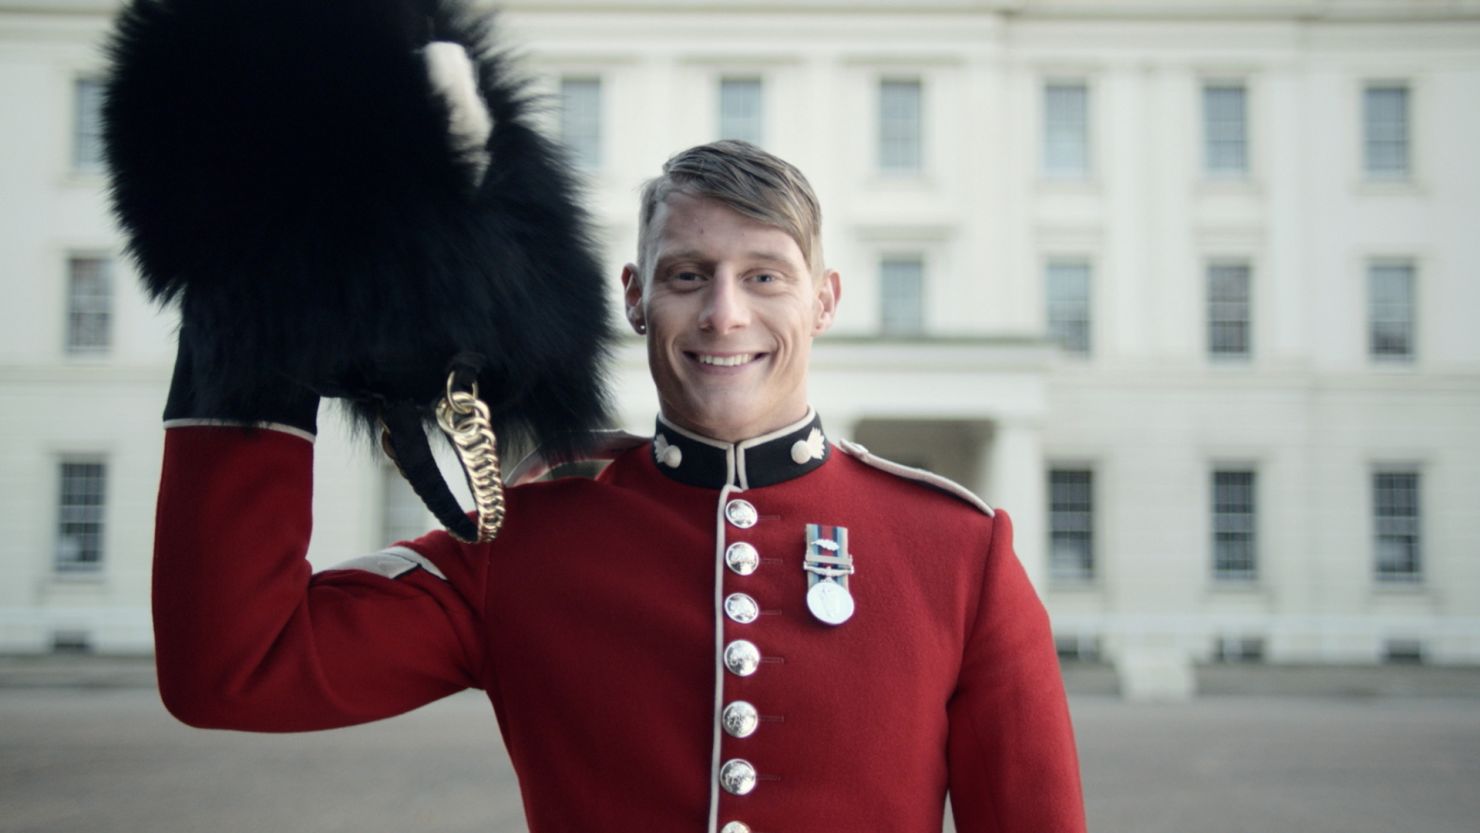 Men in bear-fur hats, steam trains and Indian restaurants feature in VisitBritain ad, but no rain.